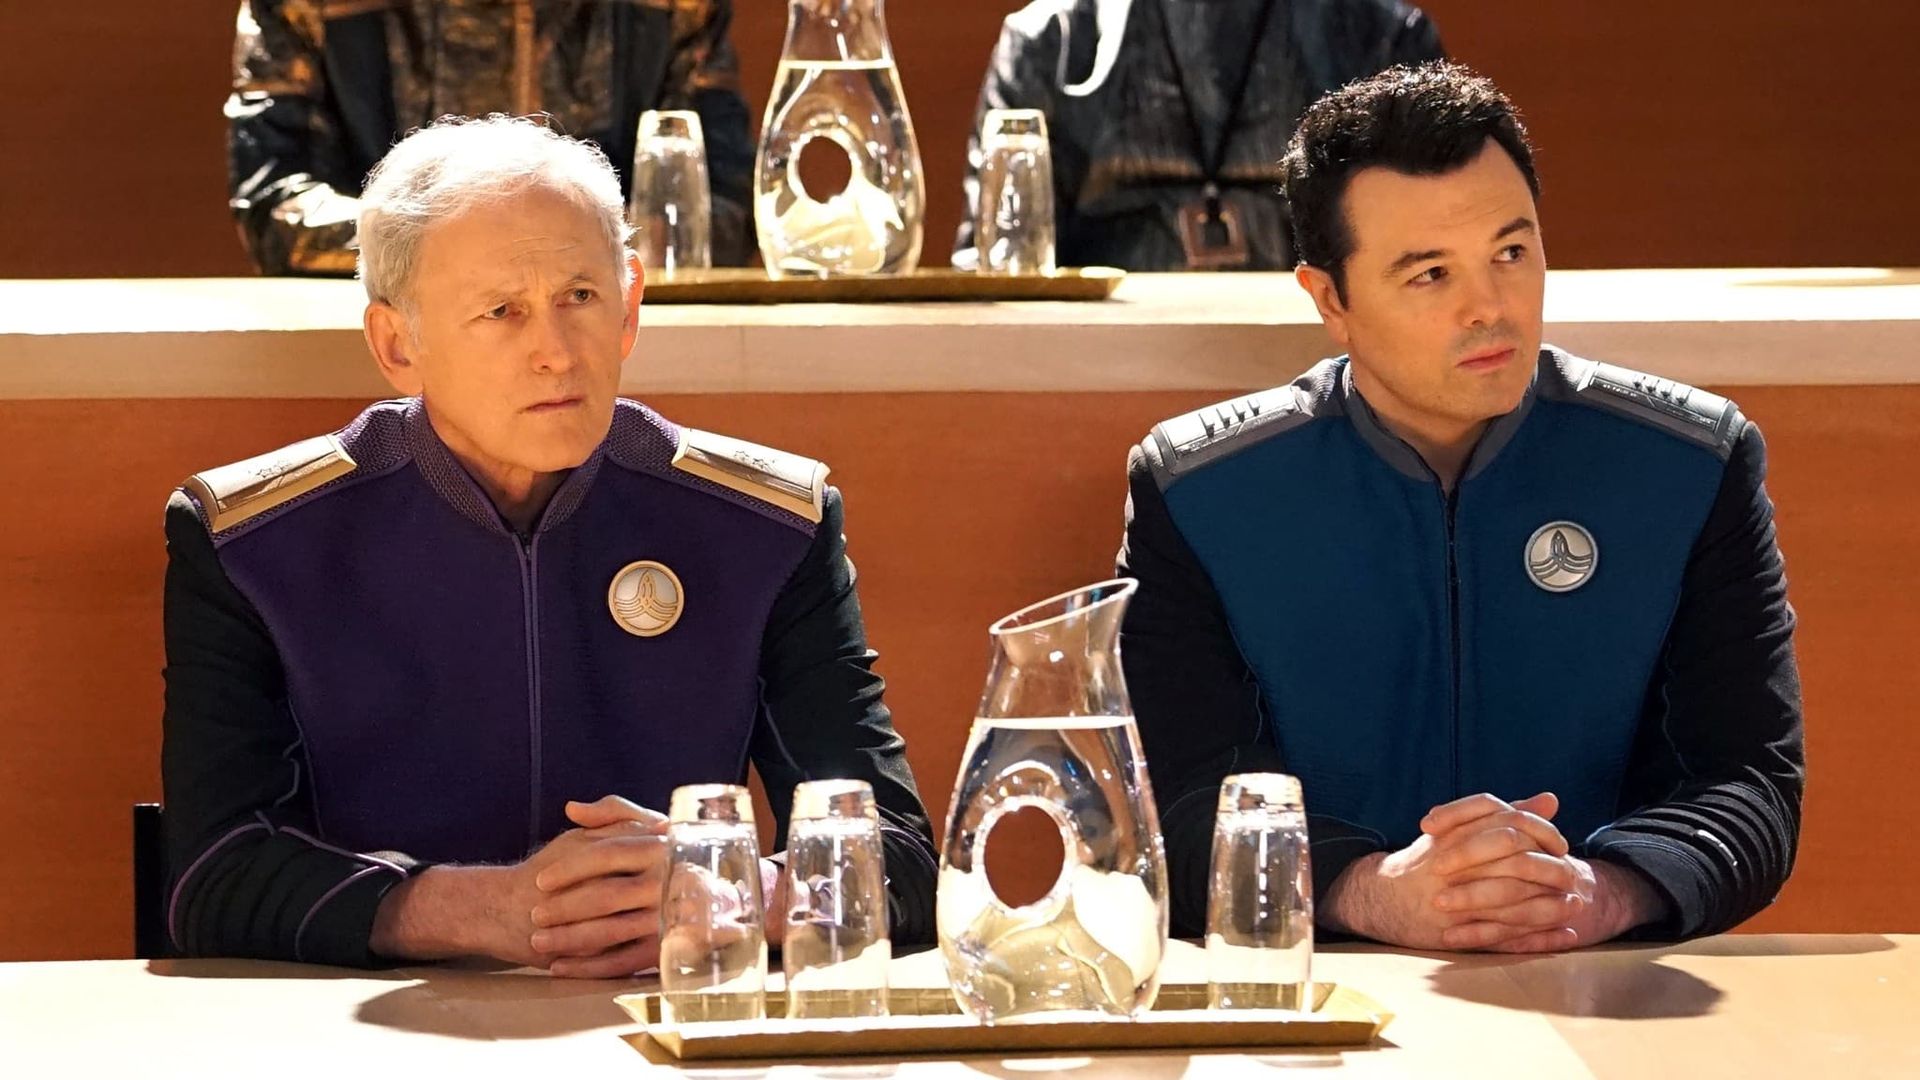 The Orville background